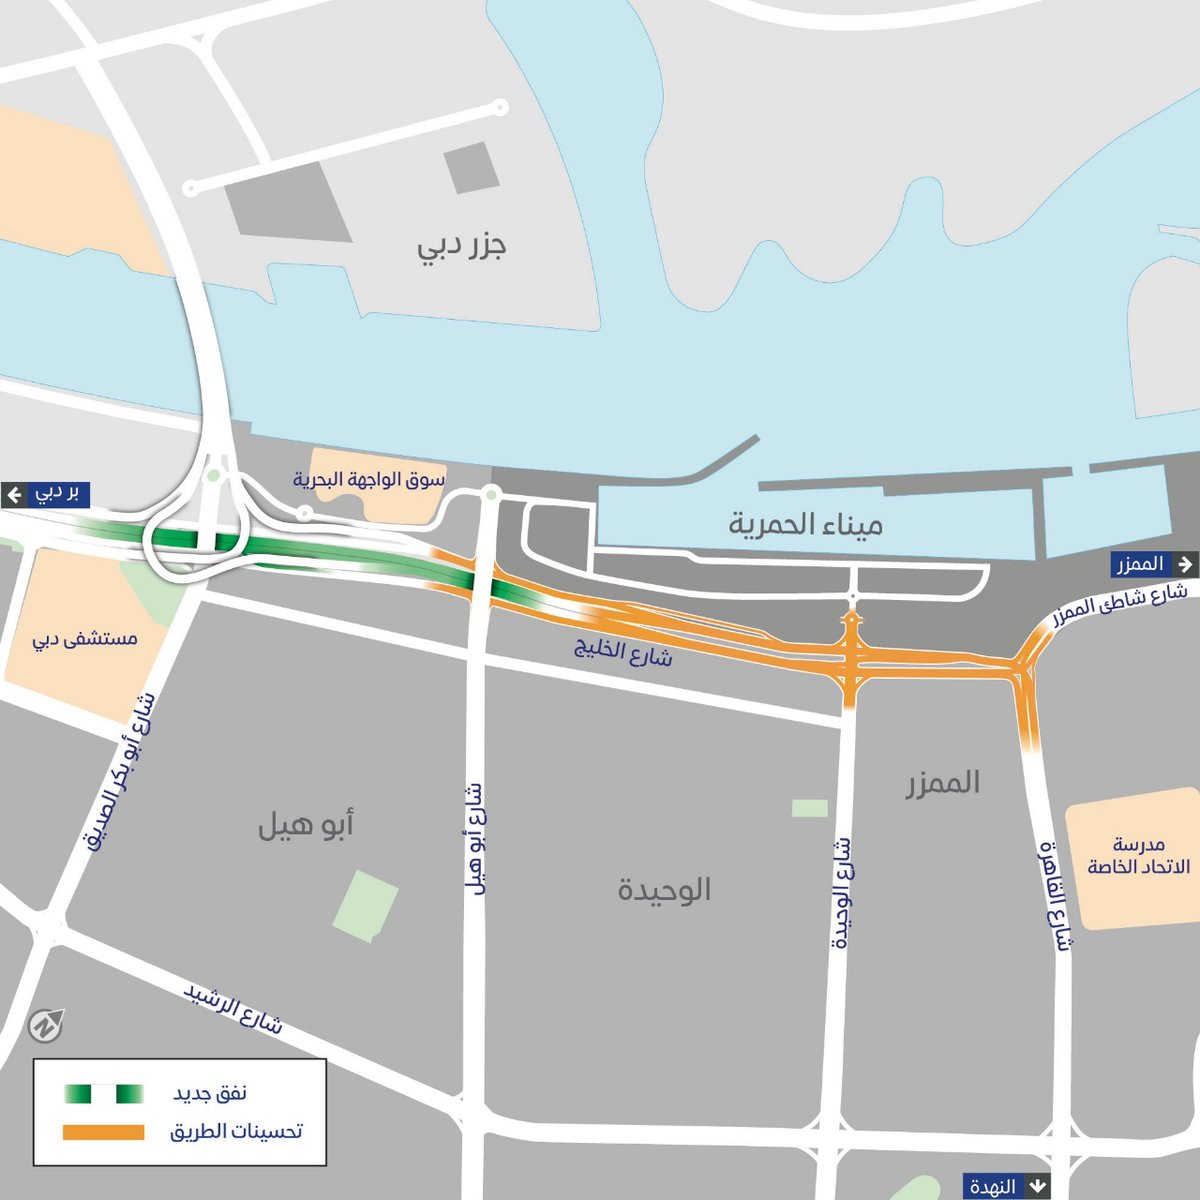 Dubai announces a major infrastructure upgrade with a new 1,650-metre tunnel as part of a Dh53 billion road project. This development aims to enhance traffic flow and urban connectivity.

#Infrastructure #Development #UrbanPlanning #Dubai #UAE